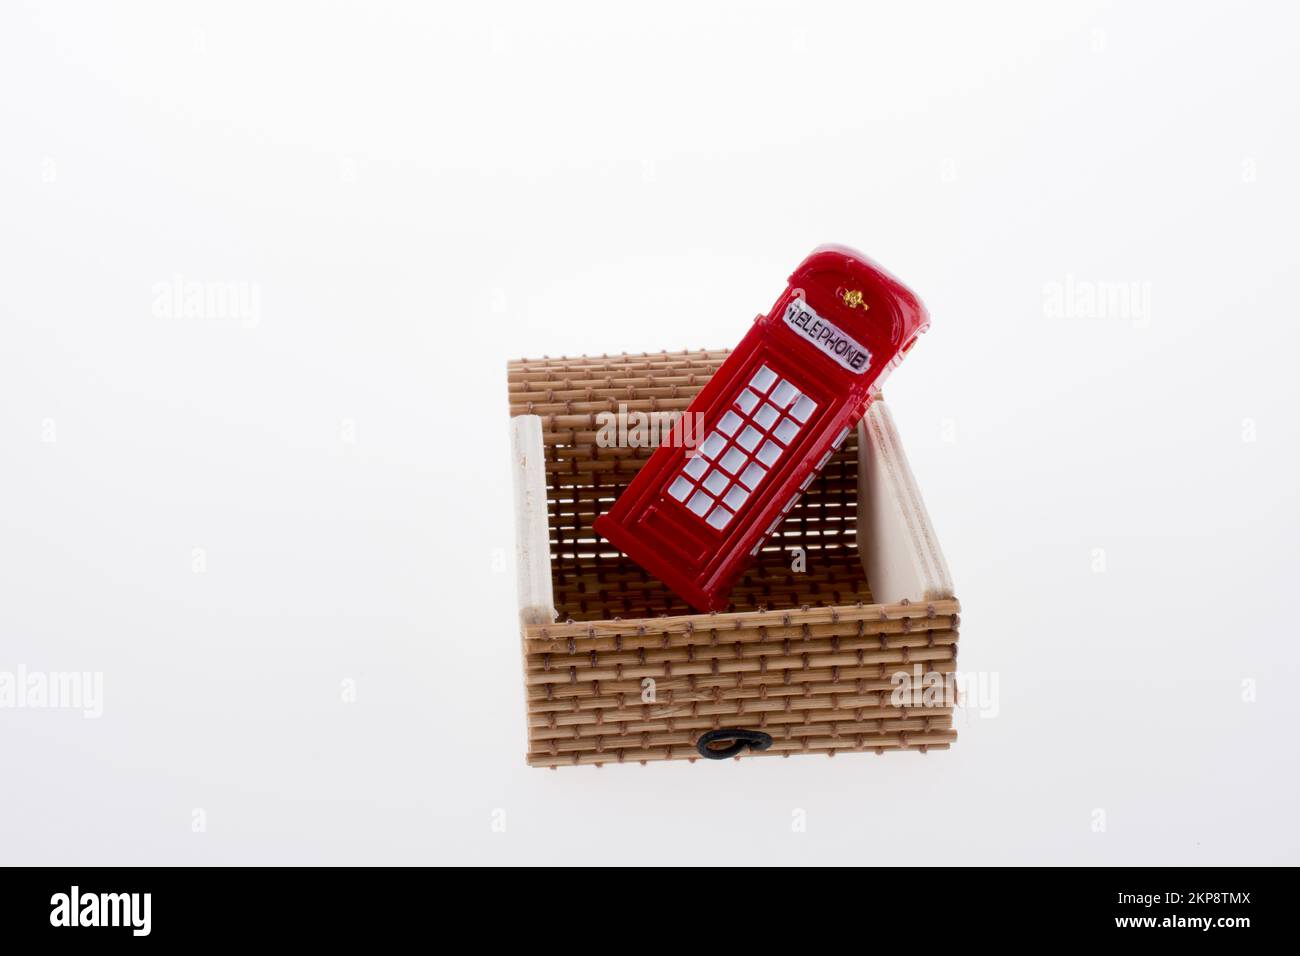 Isolated telephone booth in a straw box on white background Stock Photo